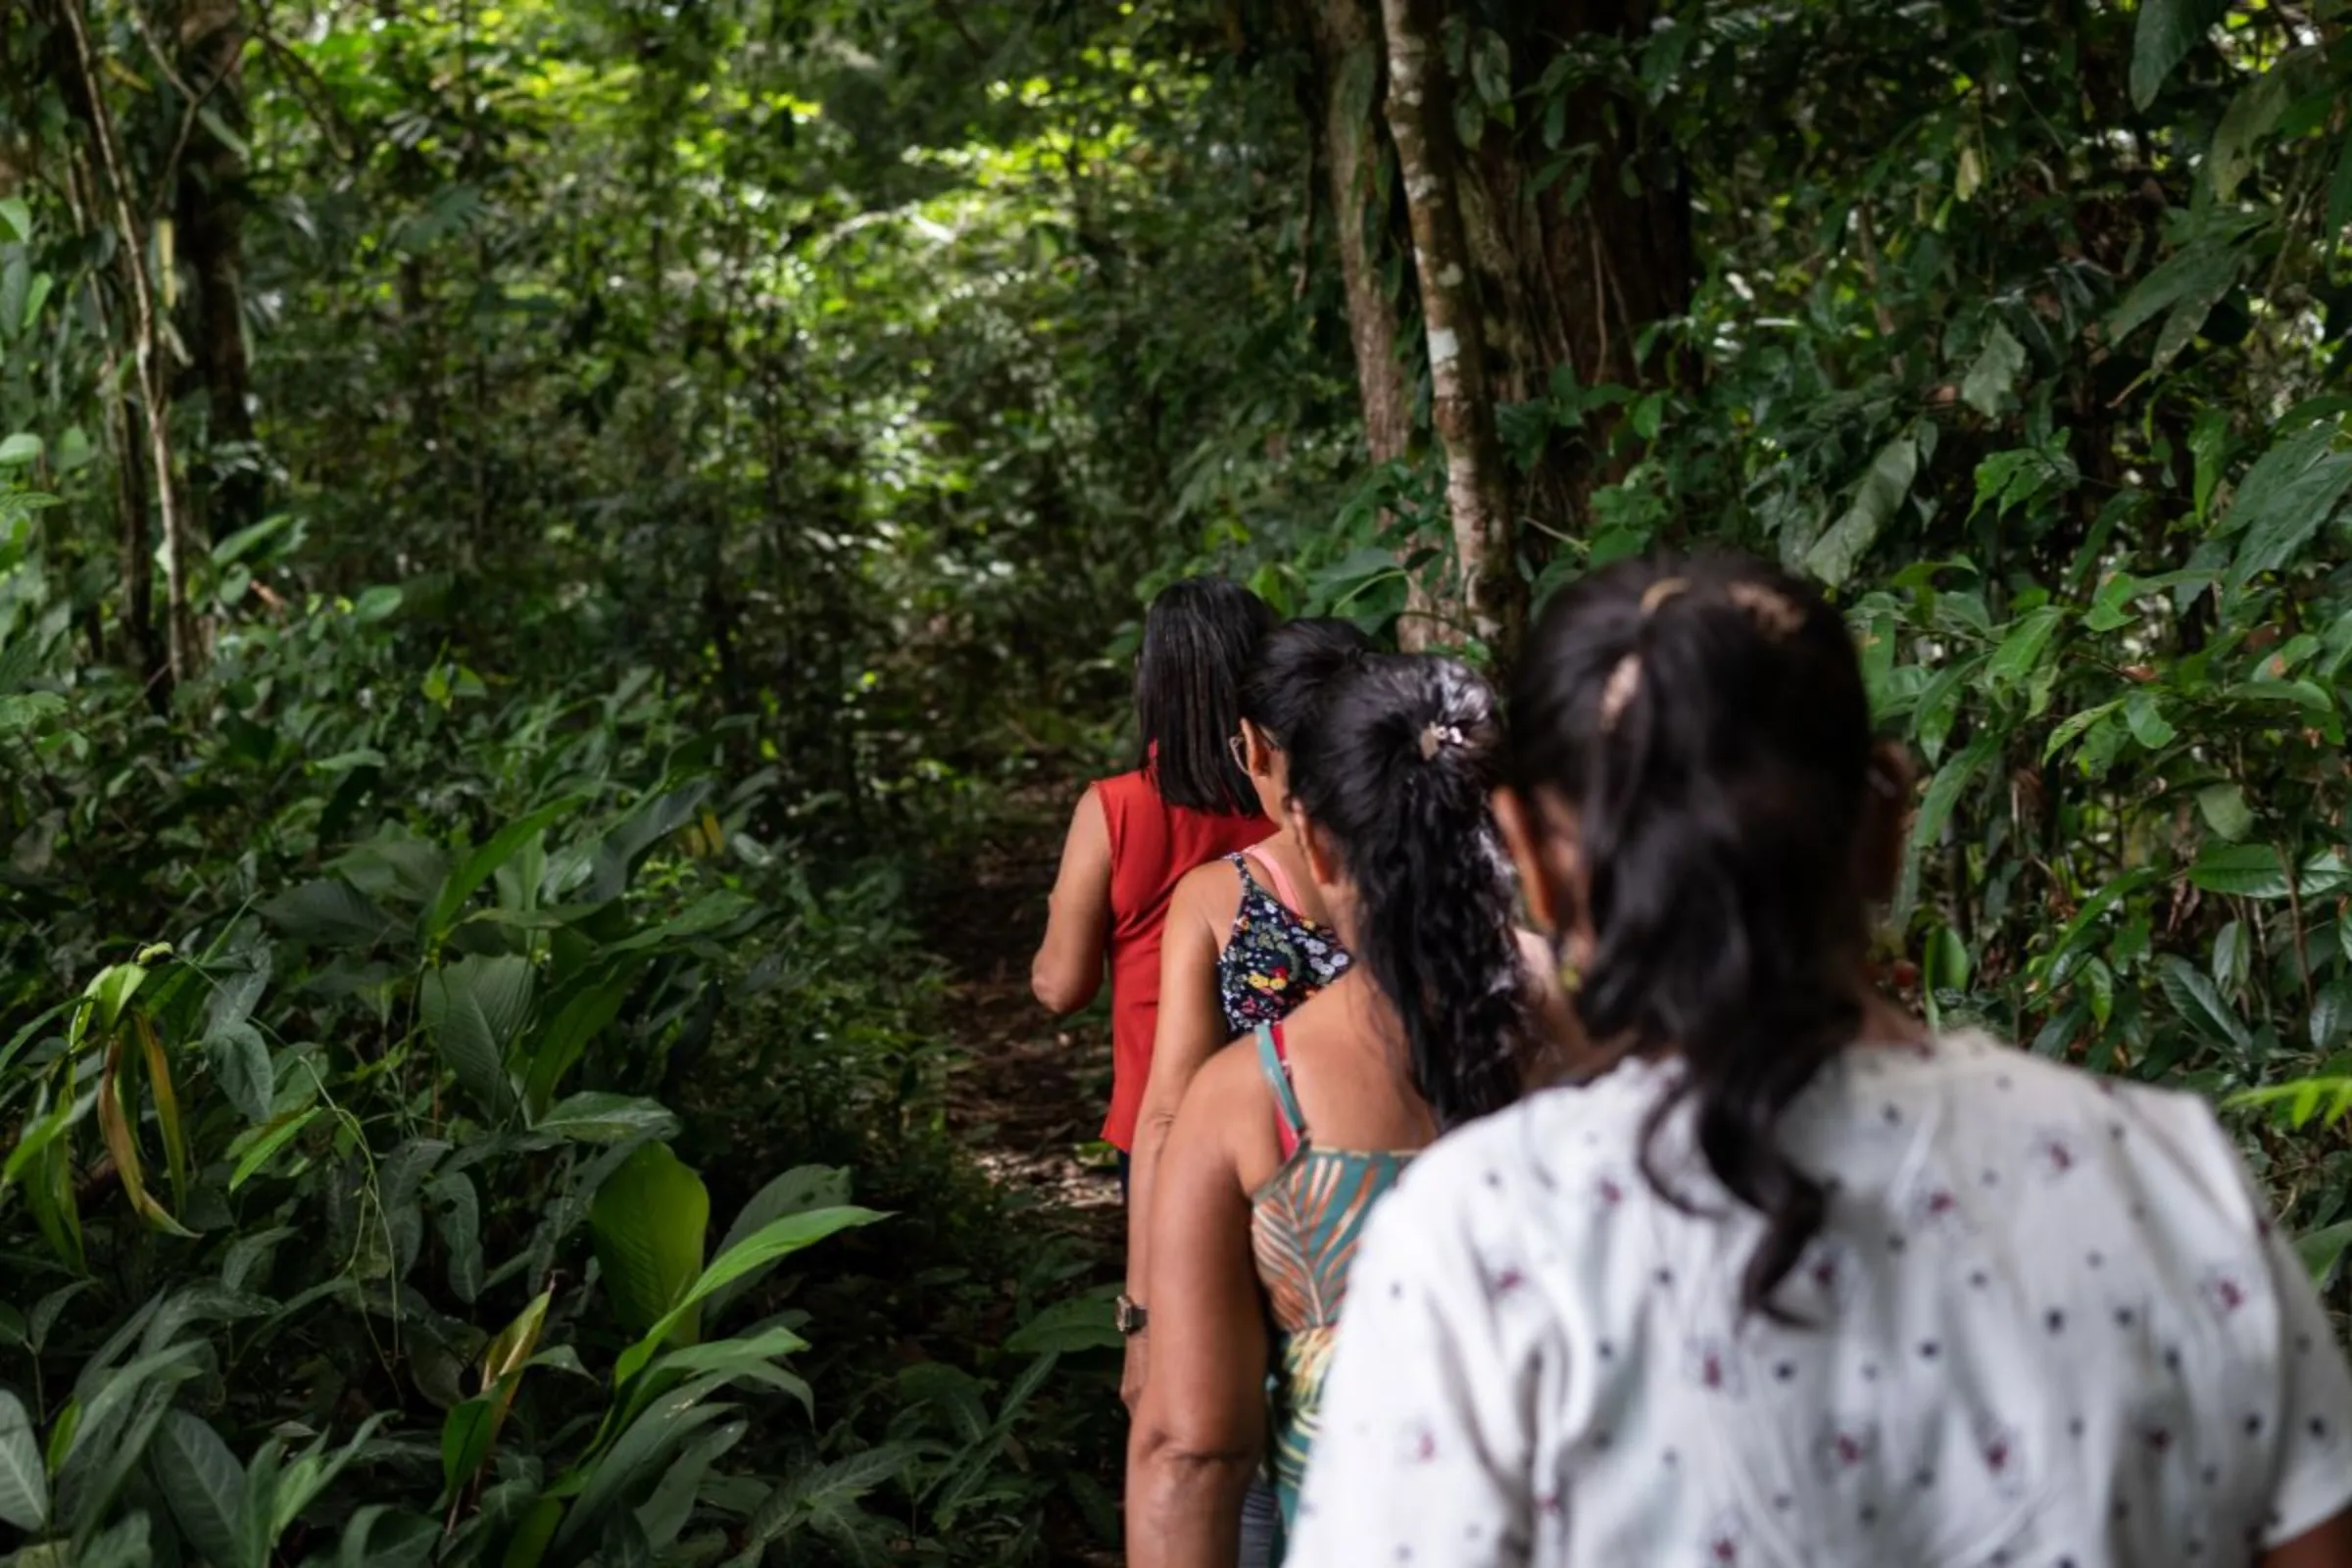 Members of the Aprocamp co-operative trek through the jungle on their way to work in Pará, Brazil, January 18, 2023. Thomson Reuters Foundation/Cícero Pedrosa Neto